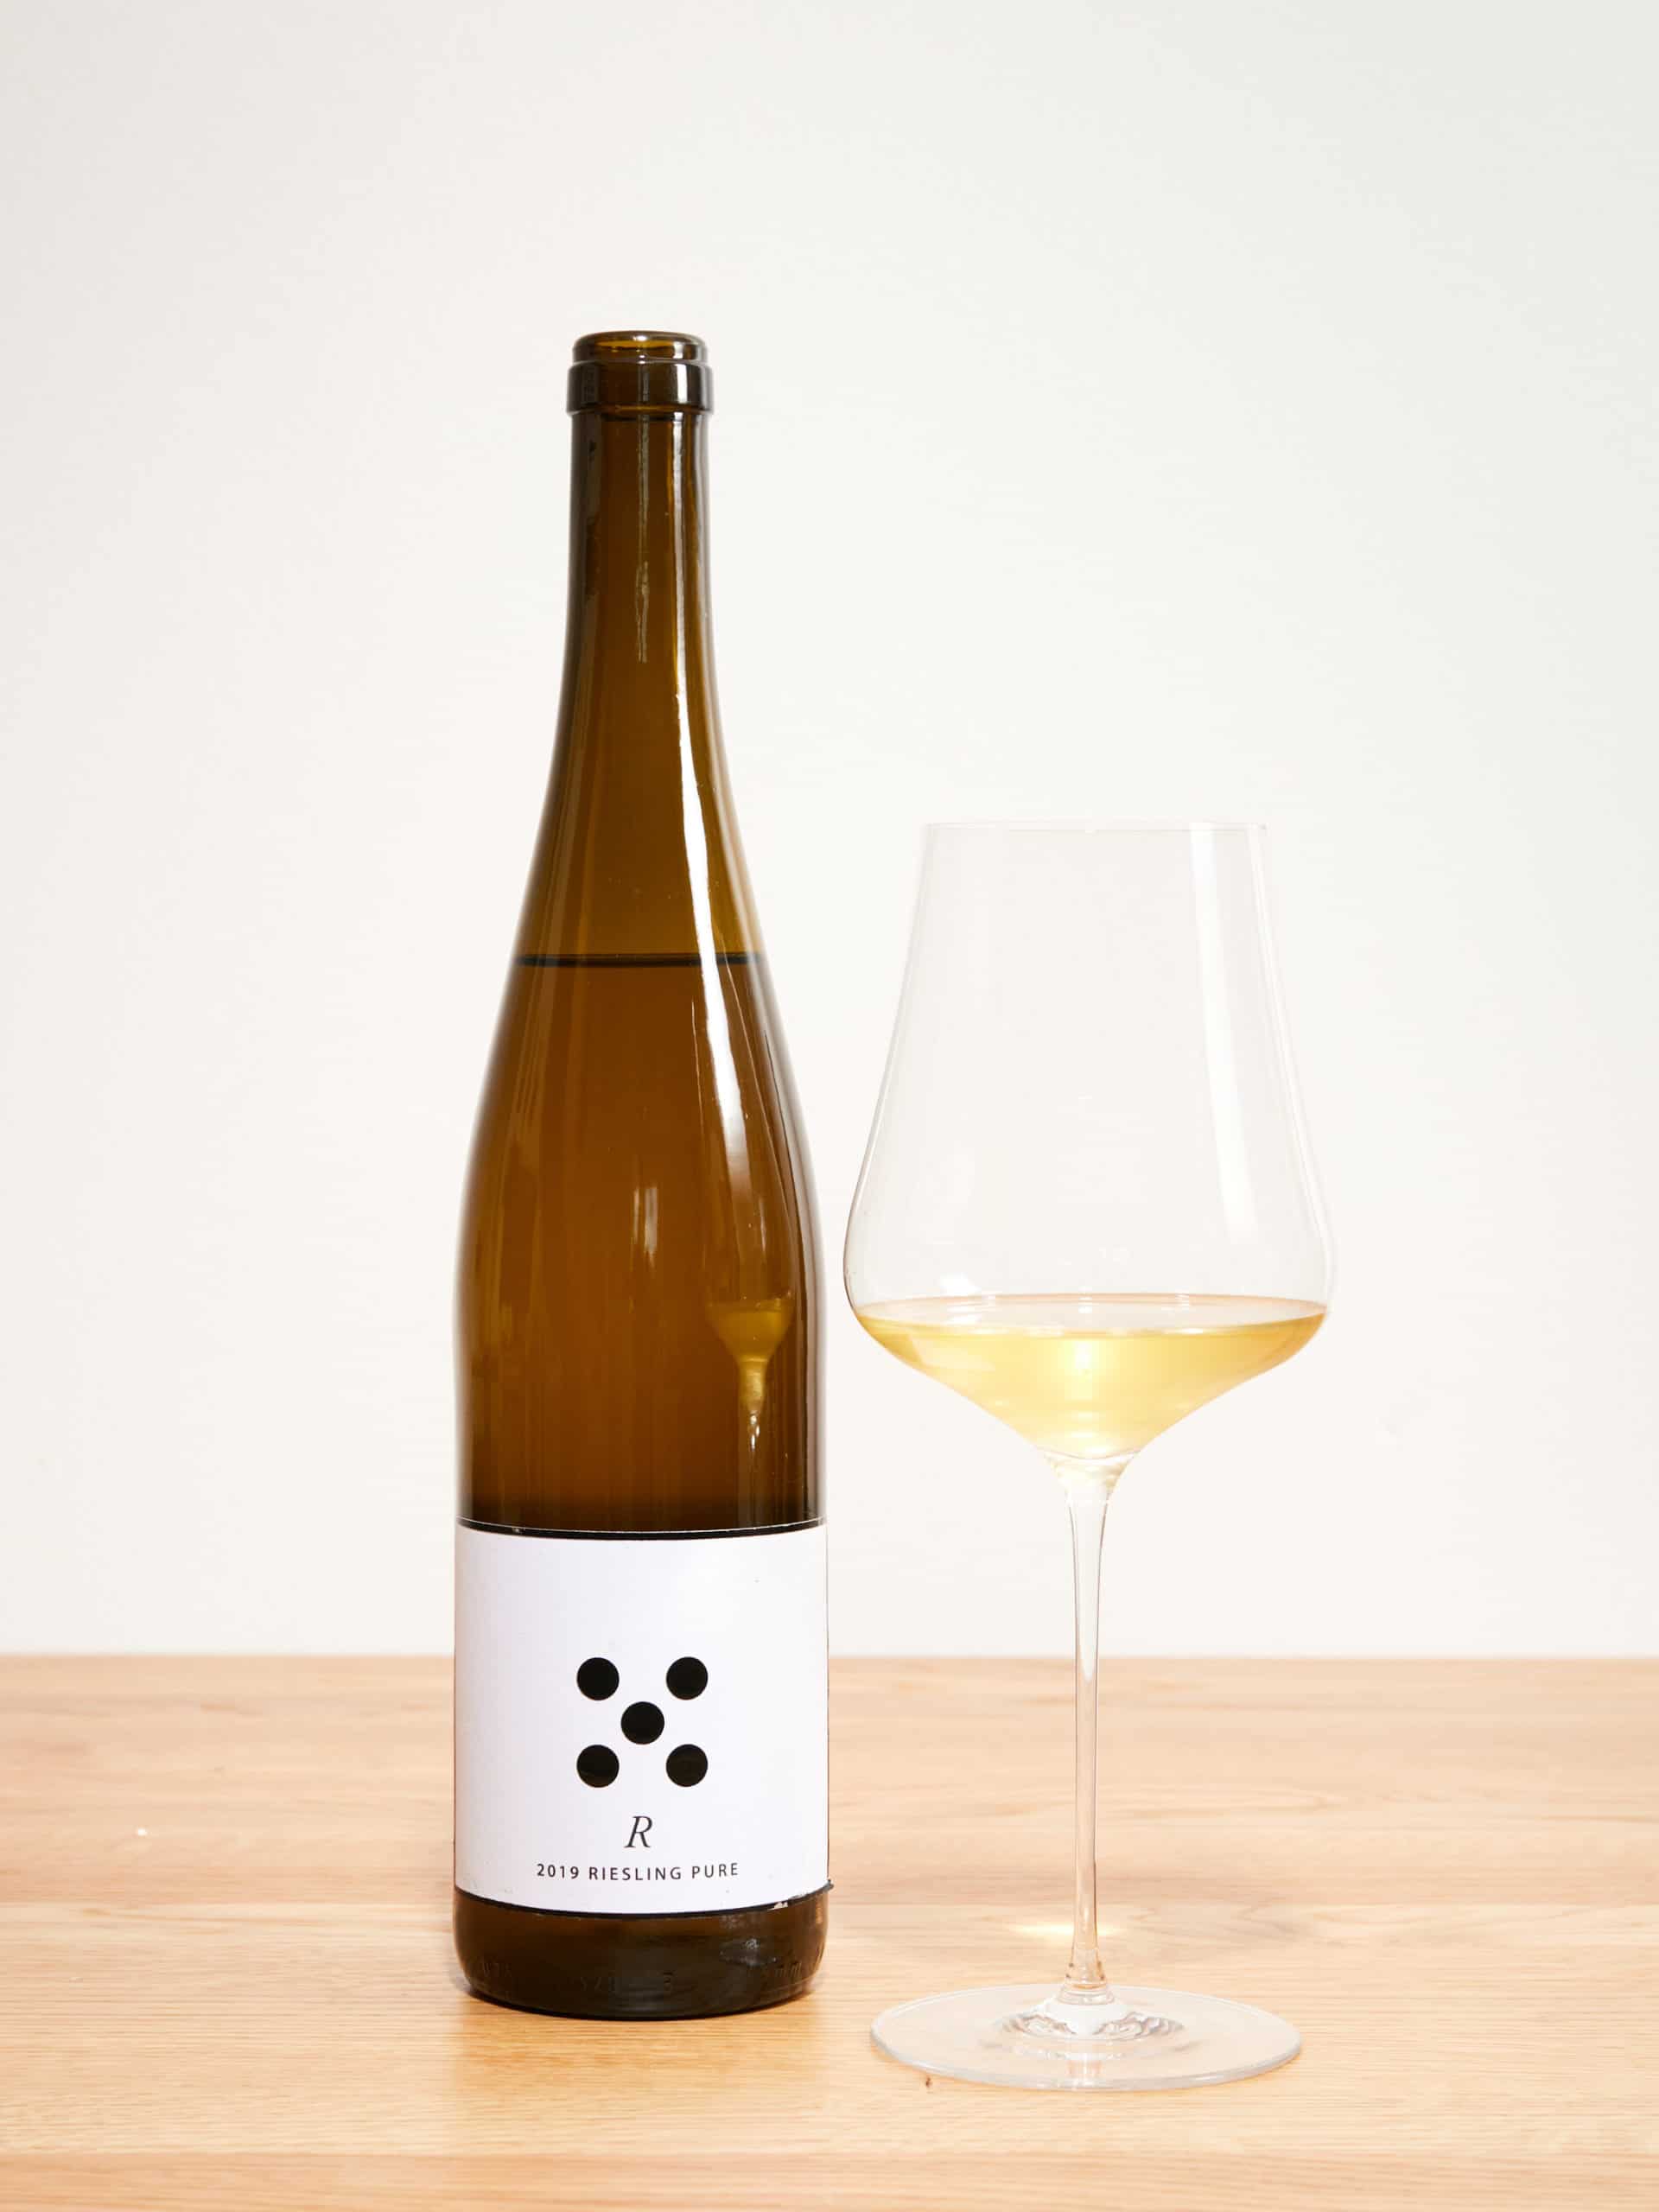 Seckinger - R Riesling Pure 2019